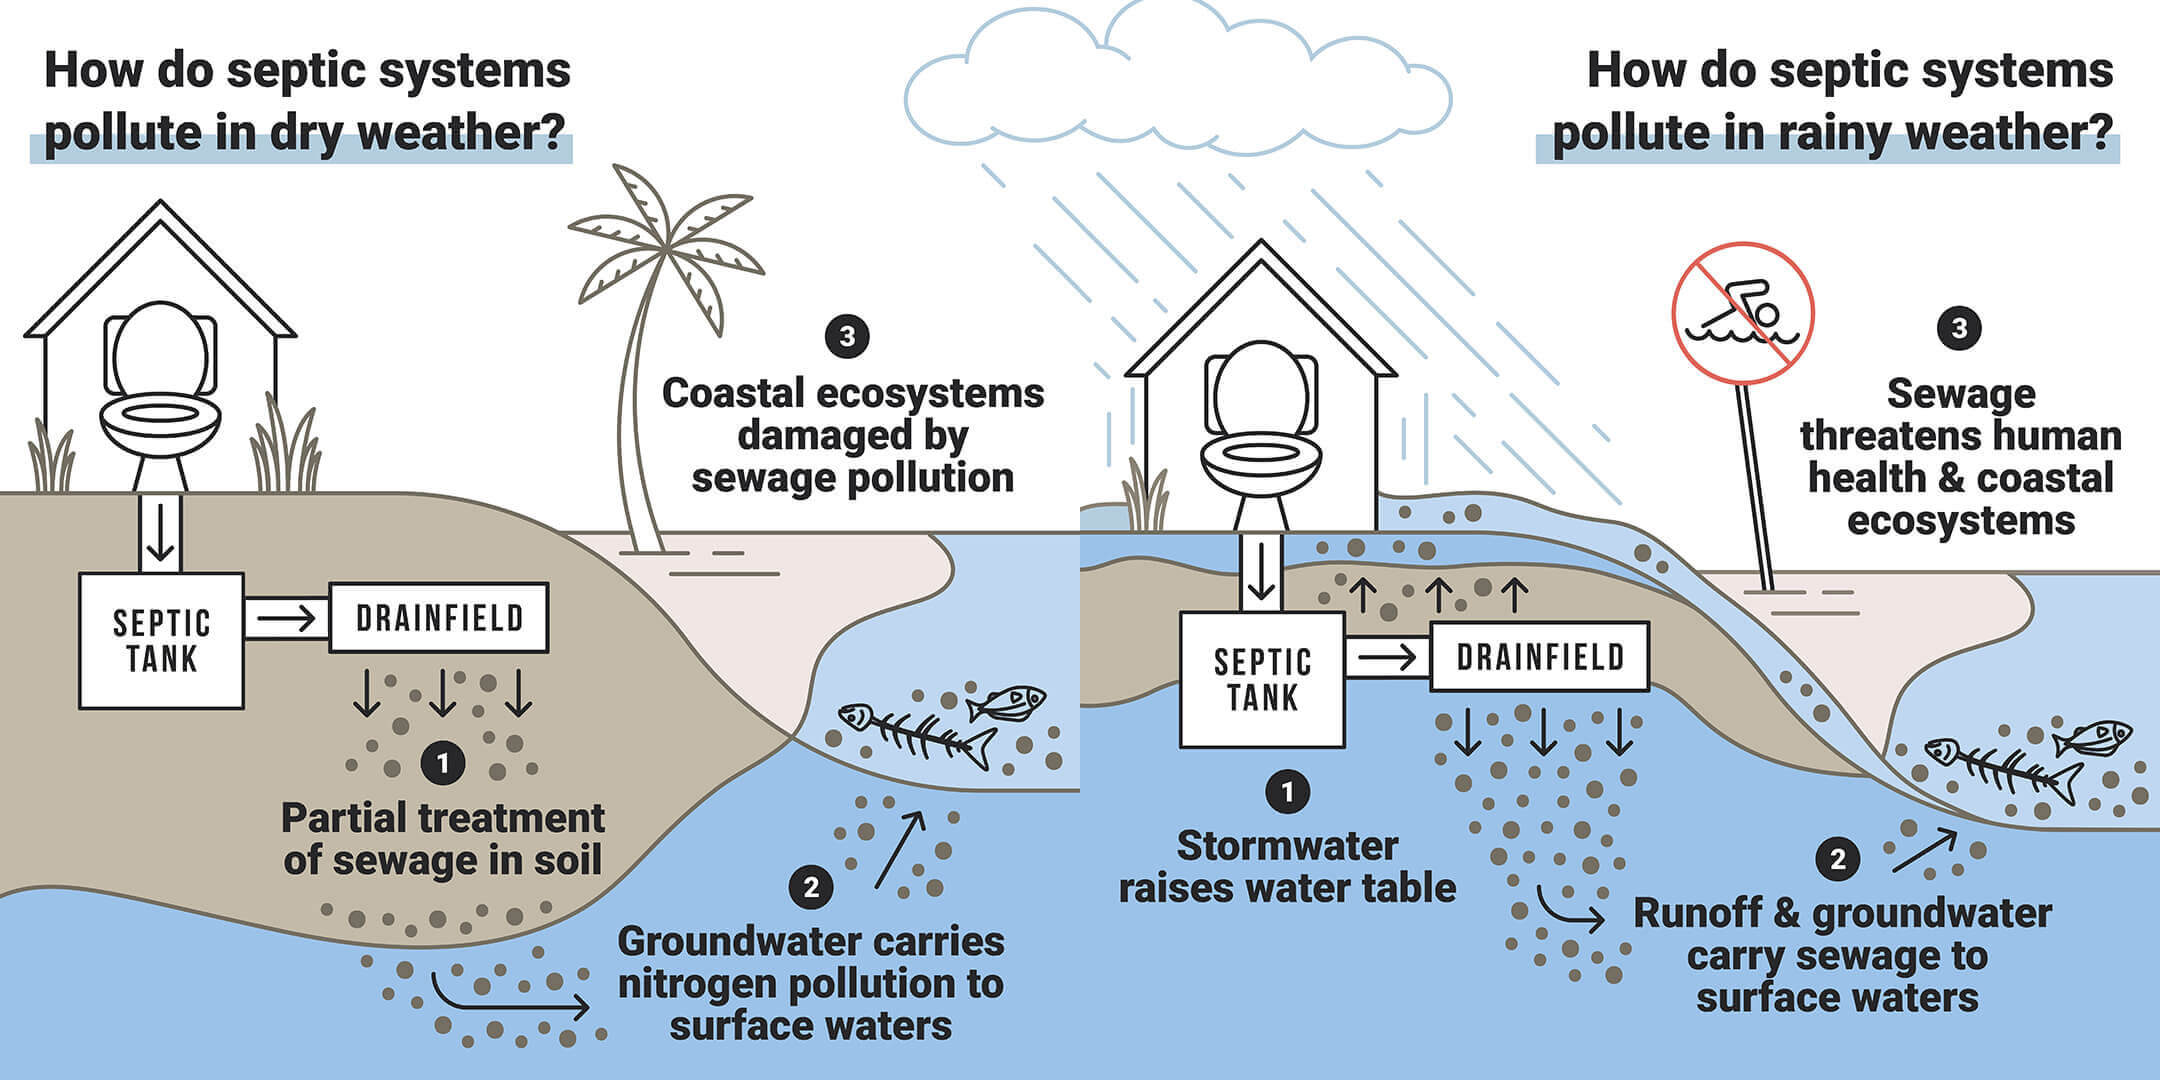 infographic showing how septic systems pollute coastal waters